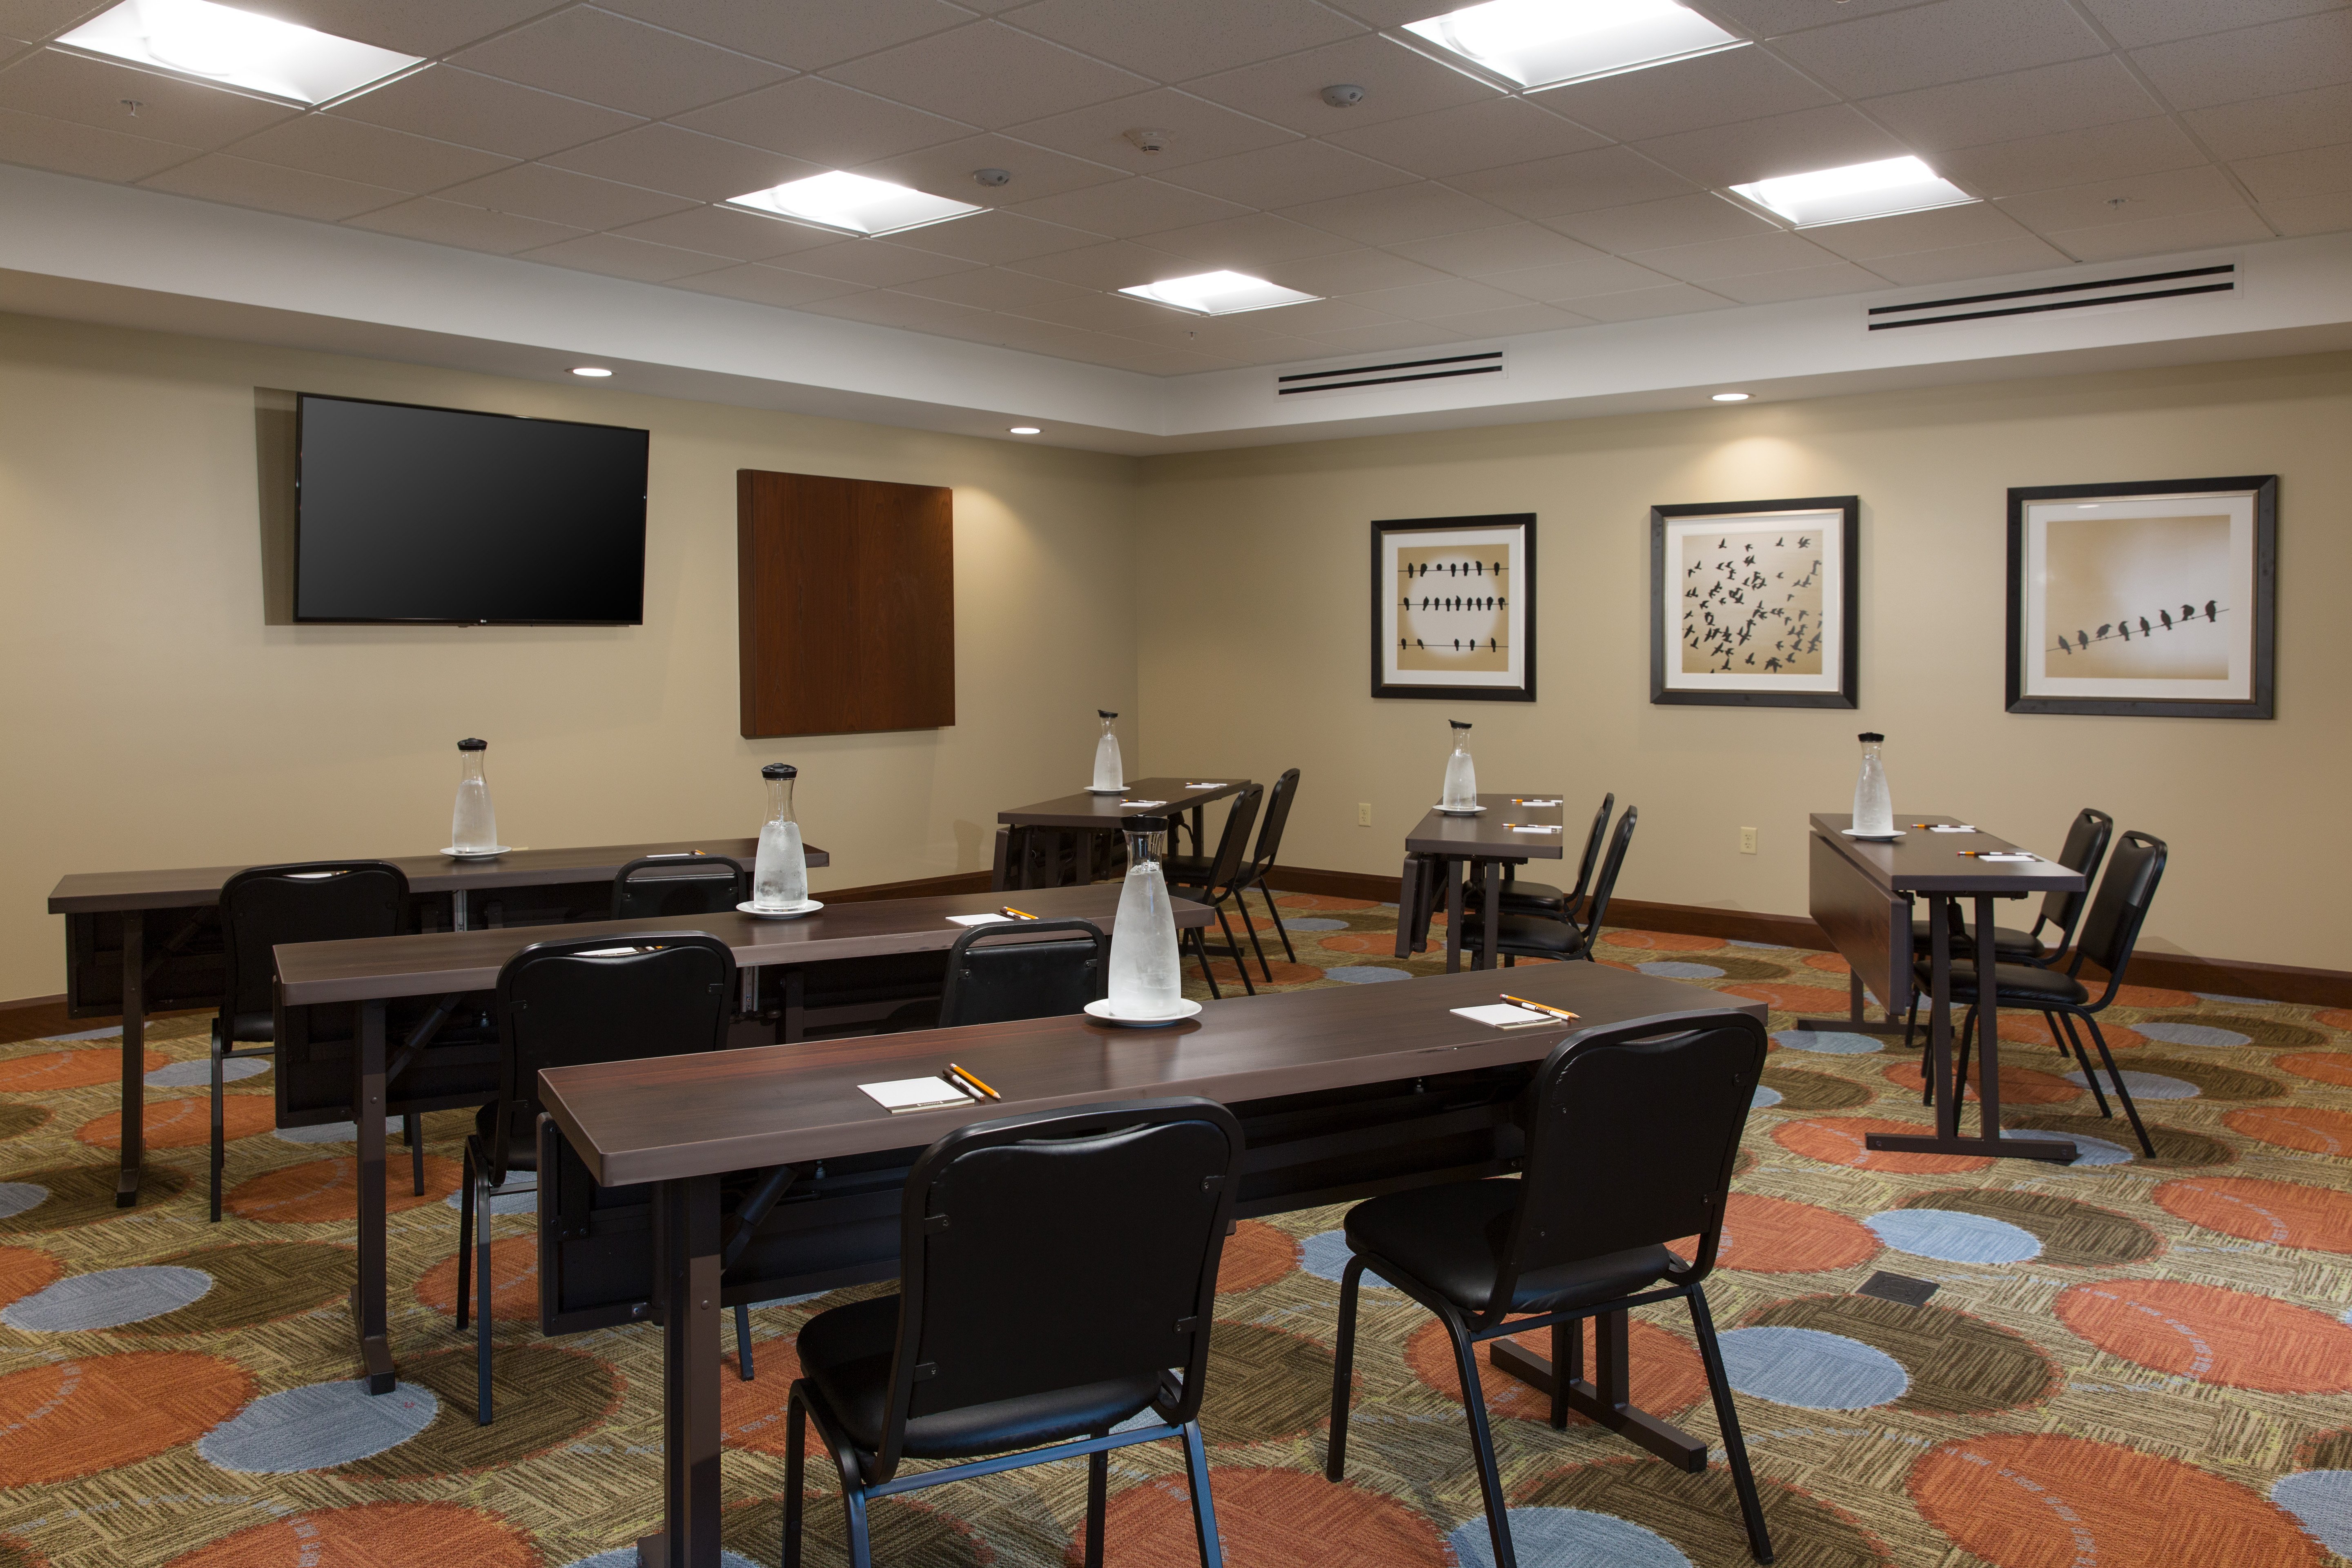 Make use of our fully equipped meeting room for your next meeting